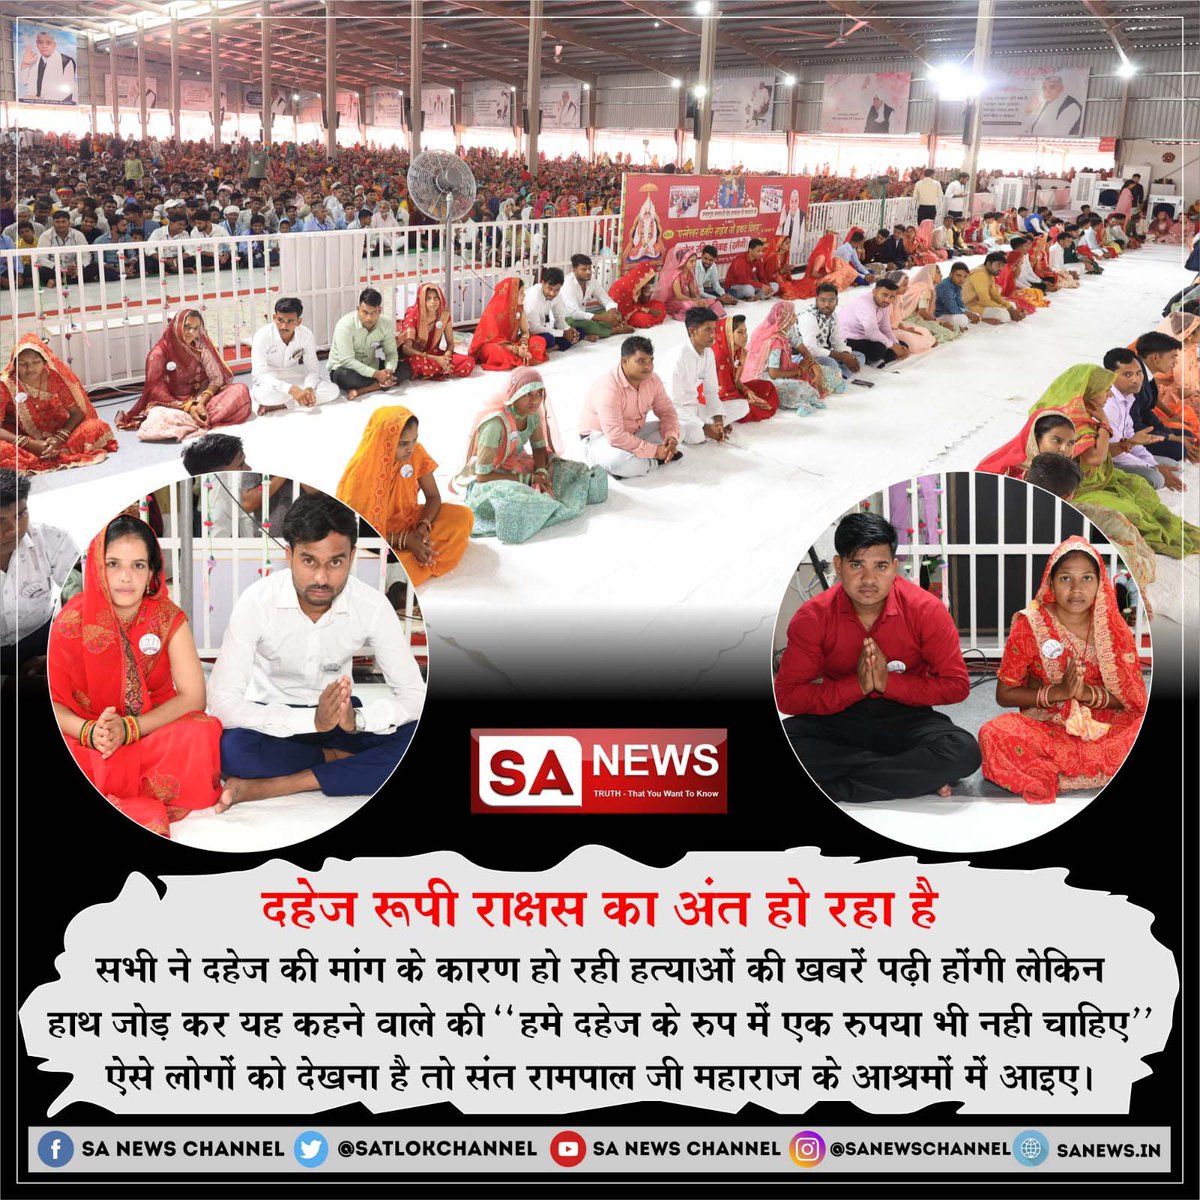 #दहेज_दानव_का_अंत_हो We will have to give up the futile extravagance in marriages. Like, giving dowry and inviting a huge wedding procession (Barat) in a girl's marriage.
@SaintRampalJiM